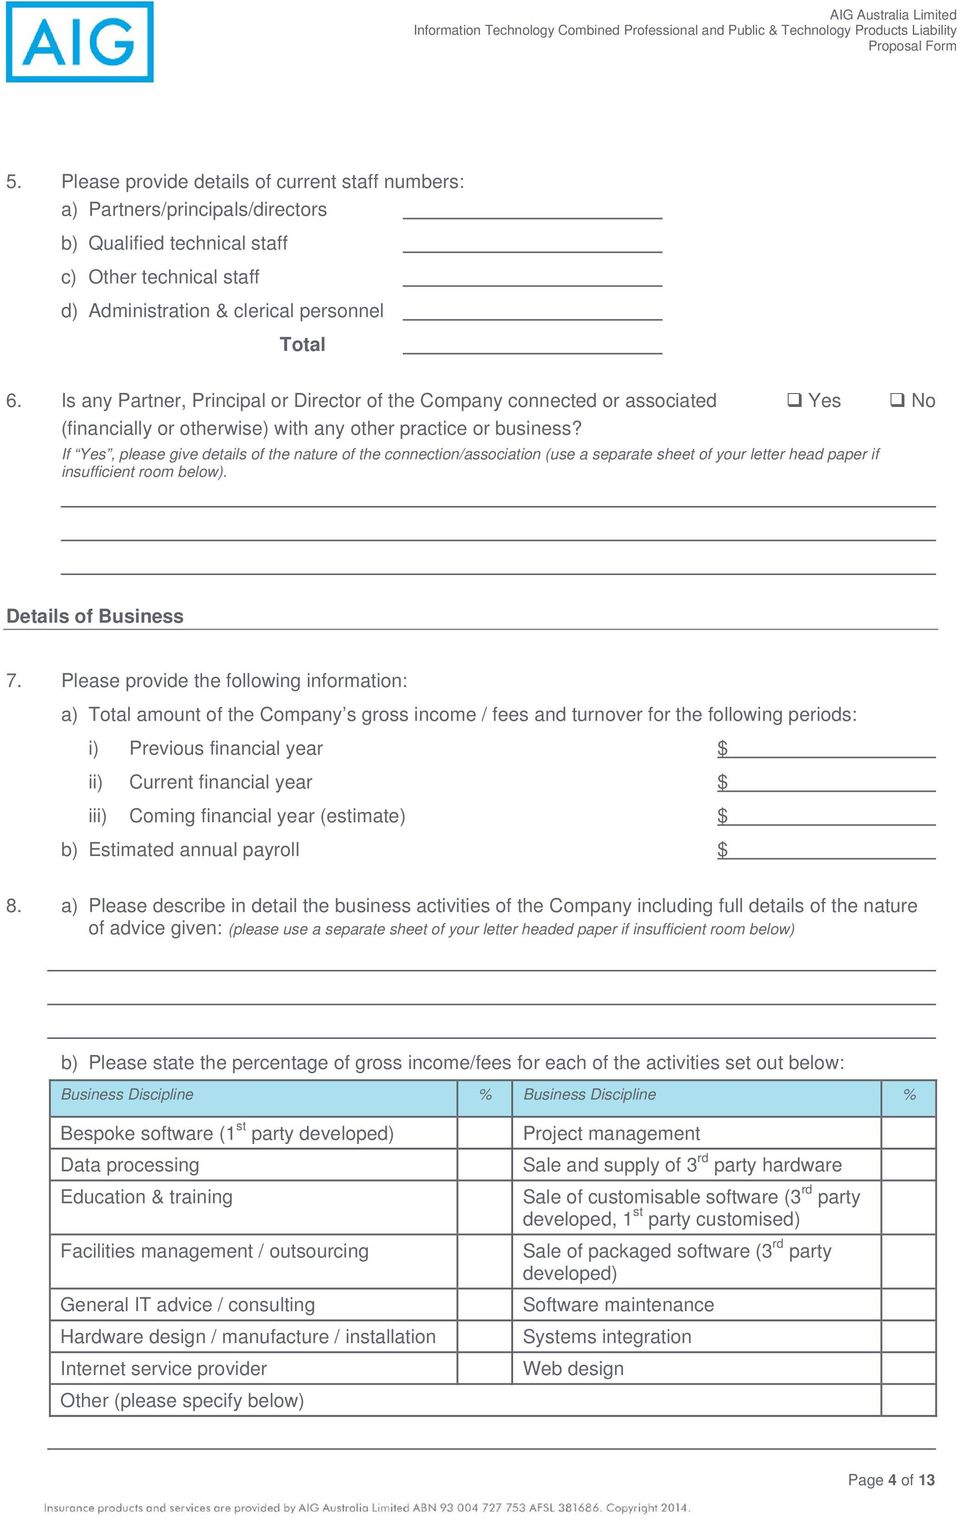 If Yes, please give details of the nature of the connection/association (use a separate sheet of your letter head paper if insufficient room below). Details of Business 7.